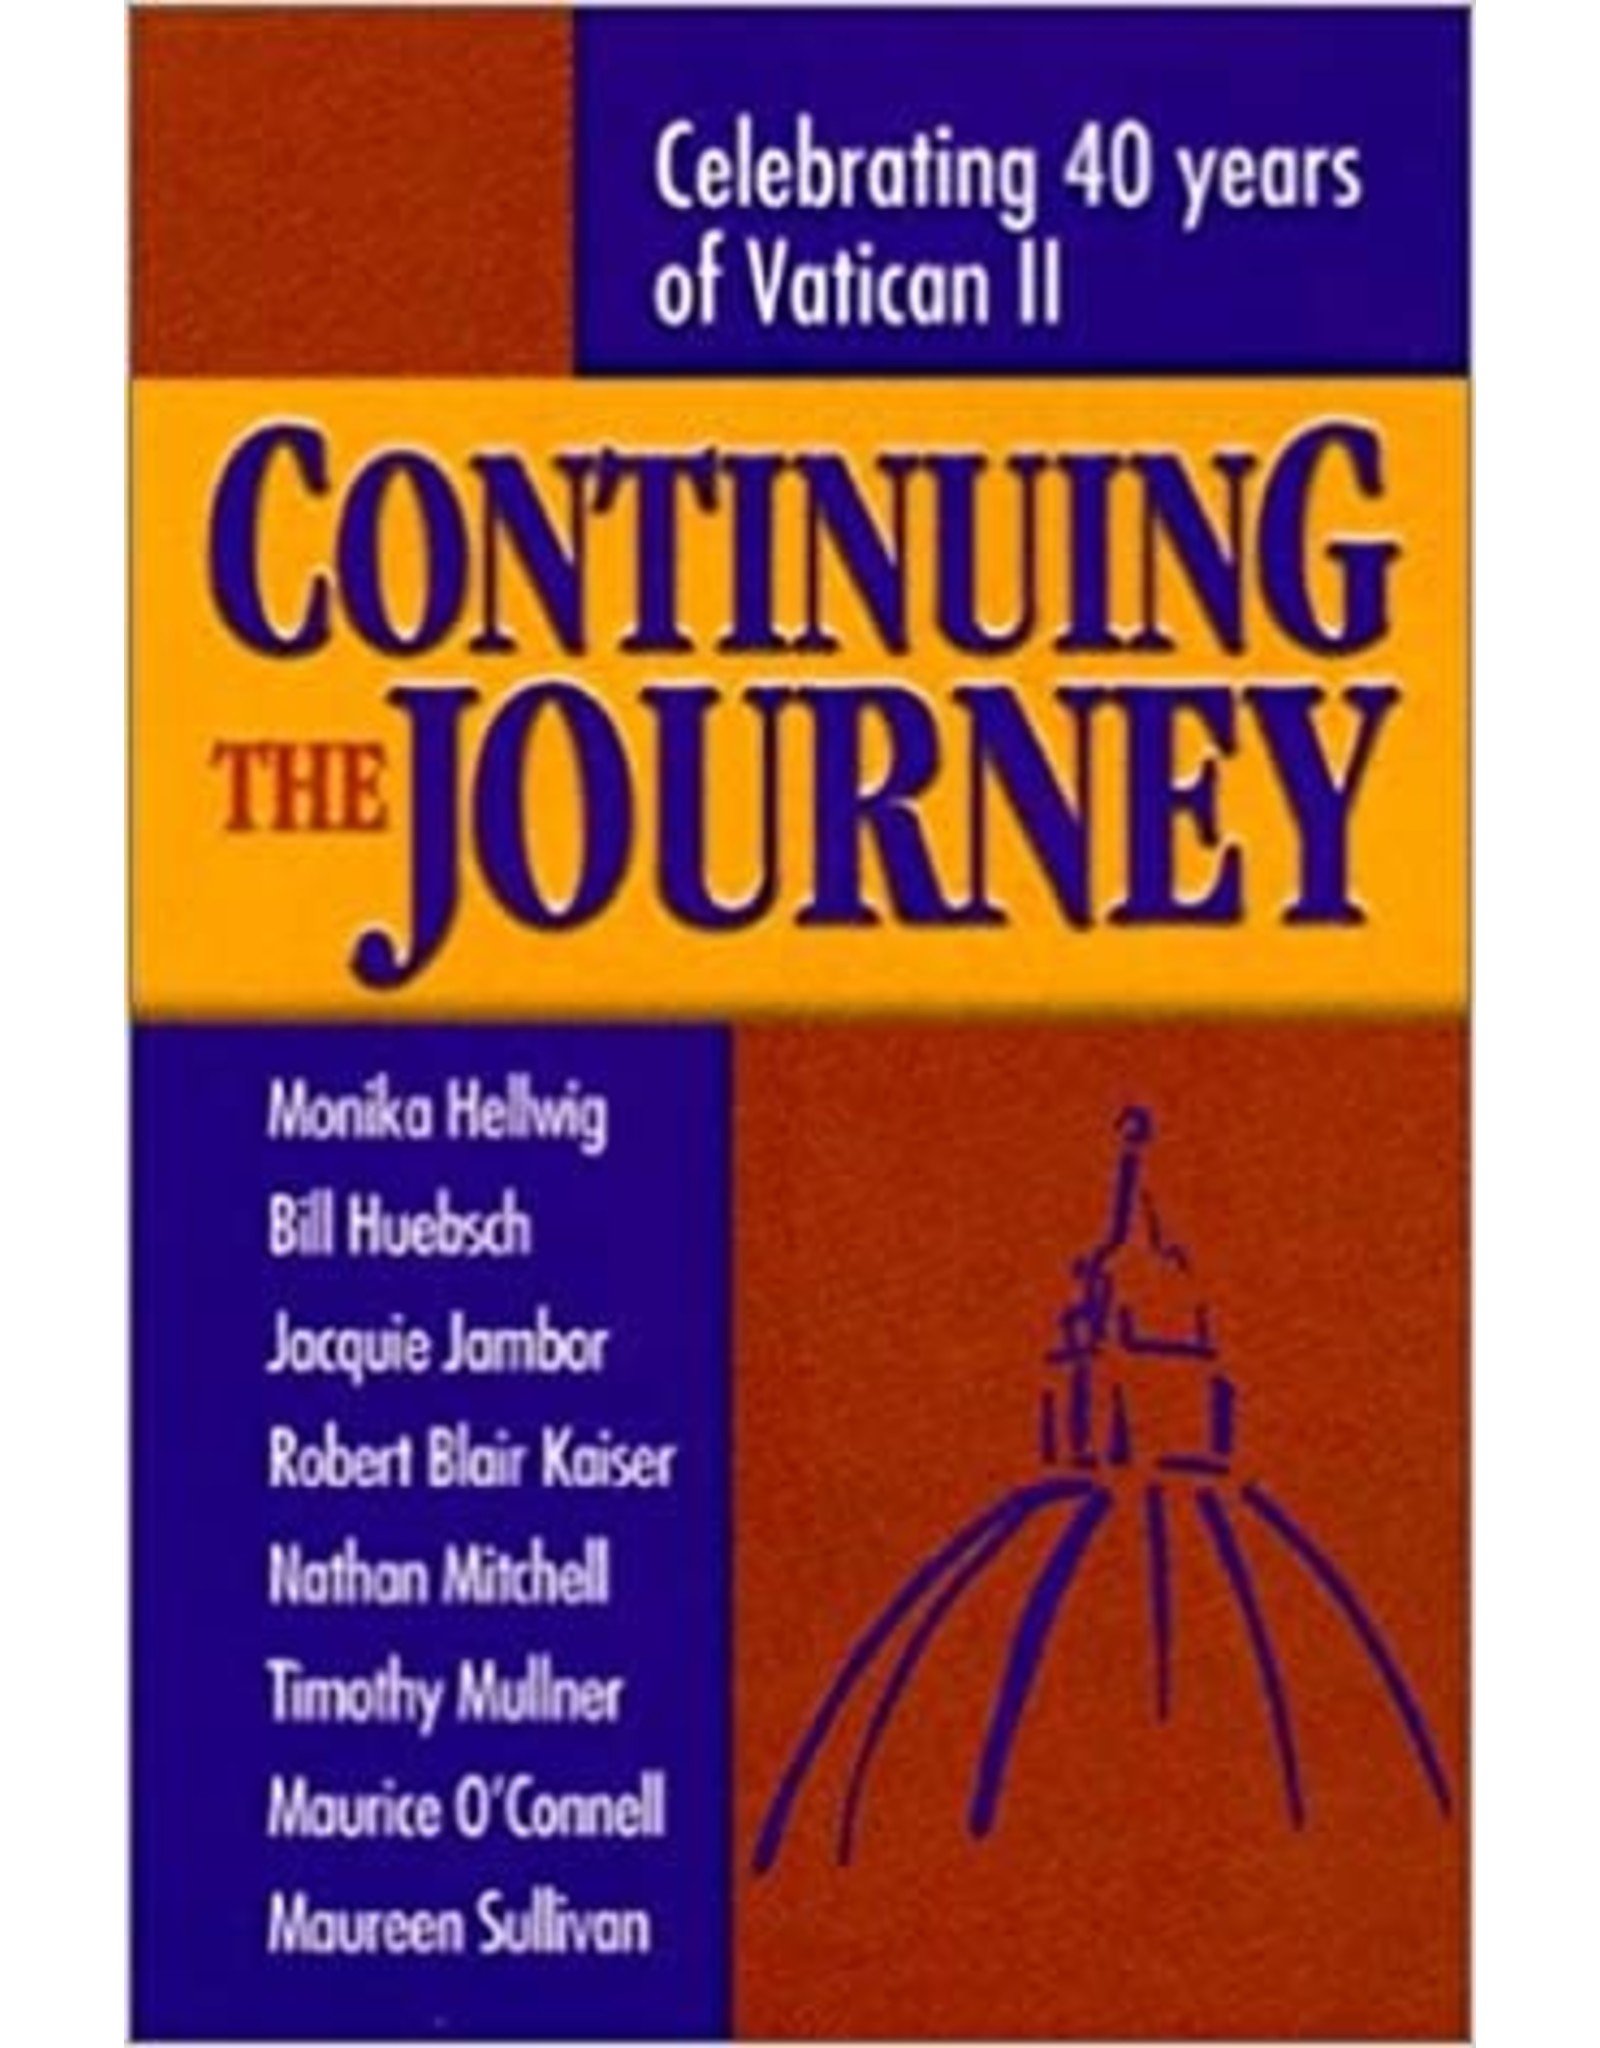 Continuing the Journey: Celebrating 40 Years of Vatican II